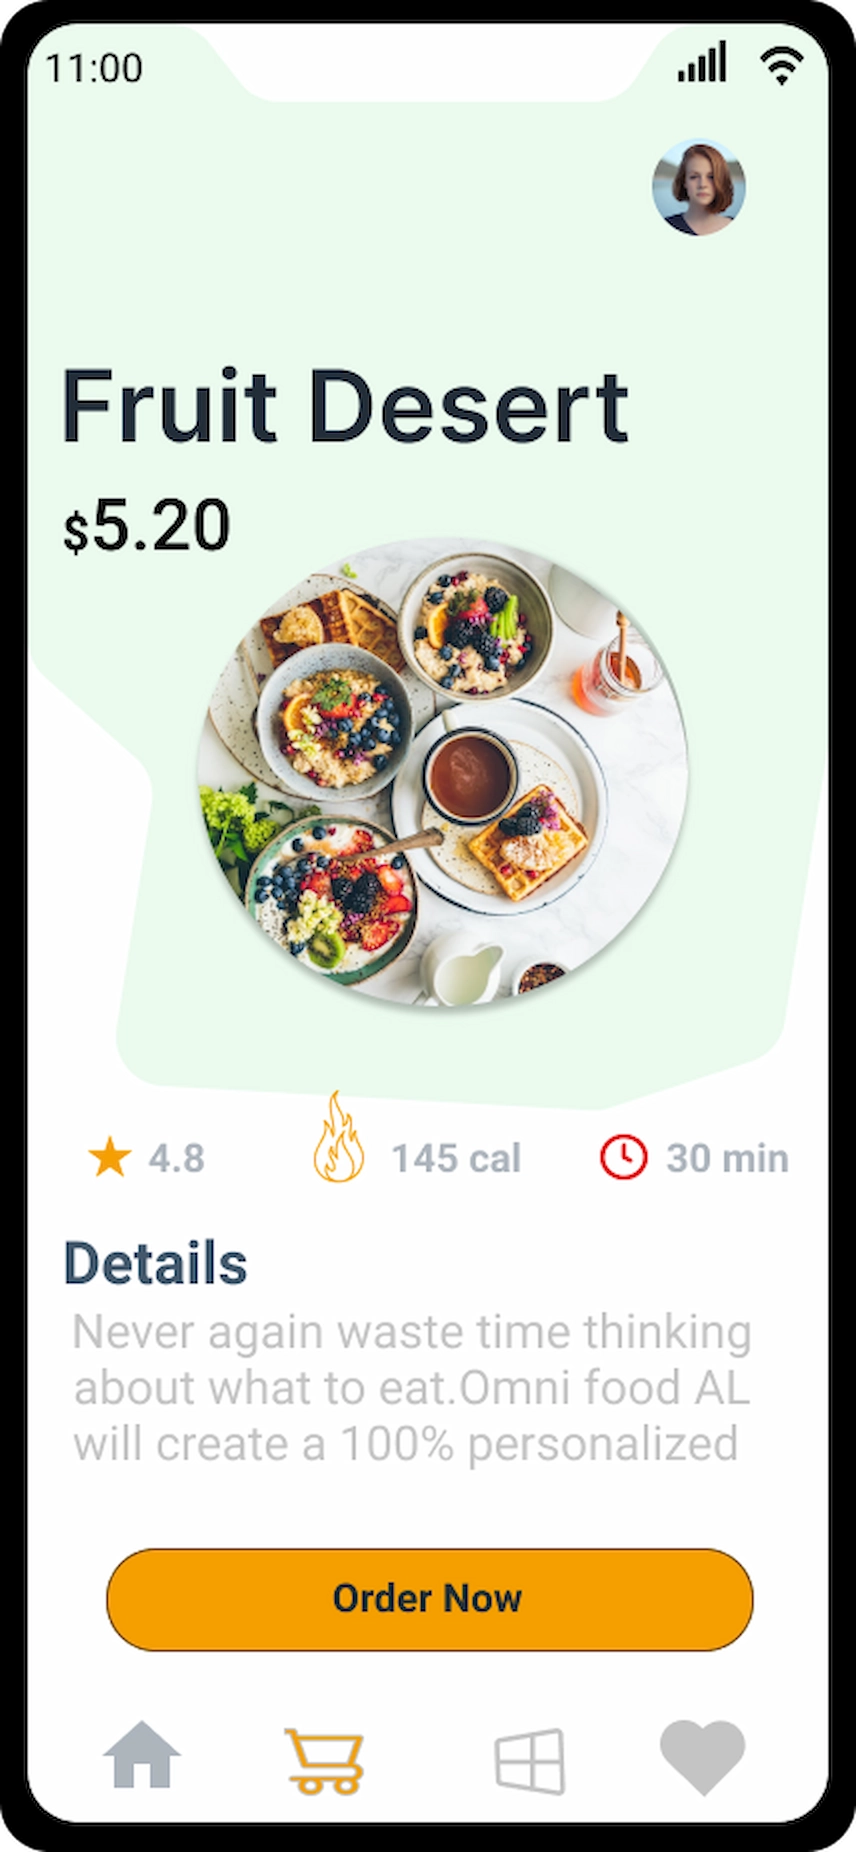 Application UI showing how to order food in just two steps